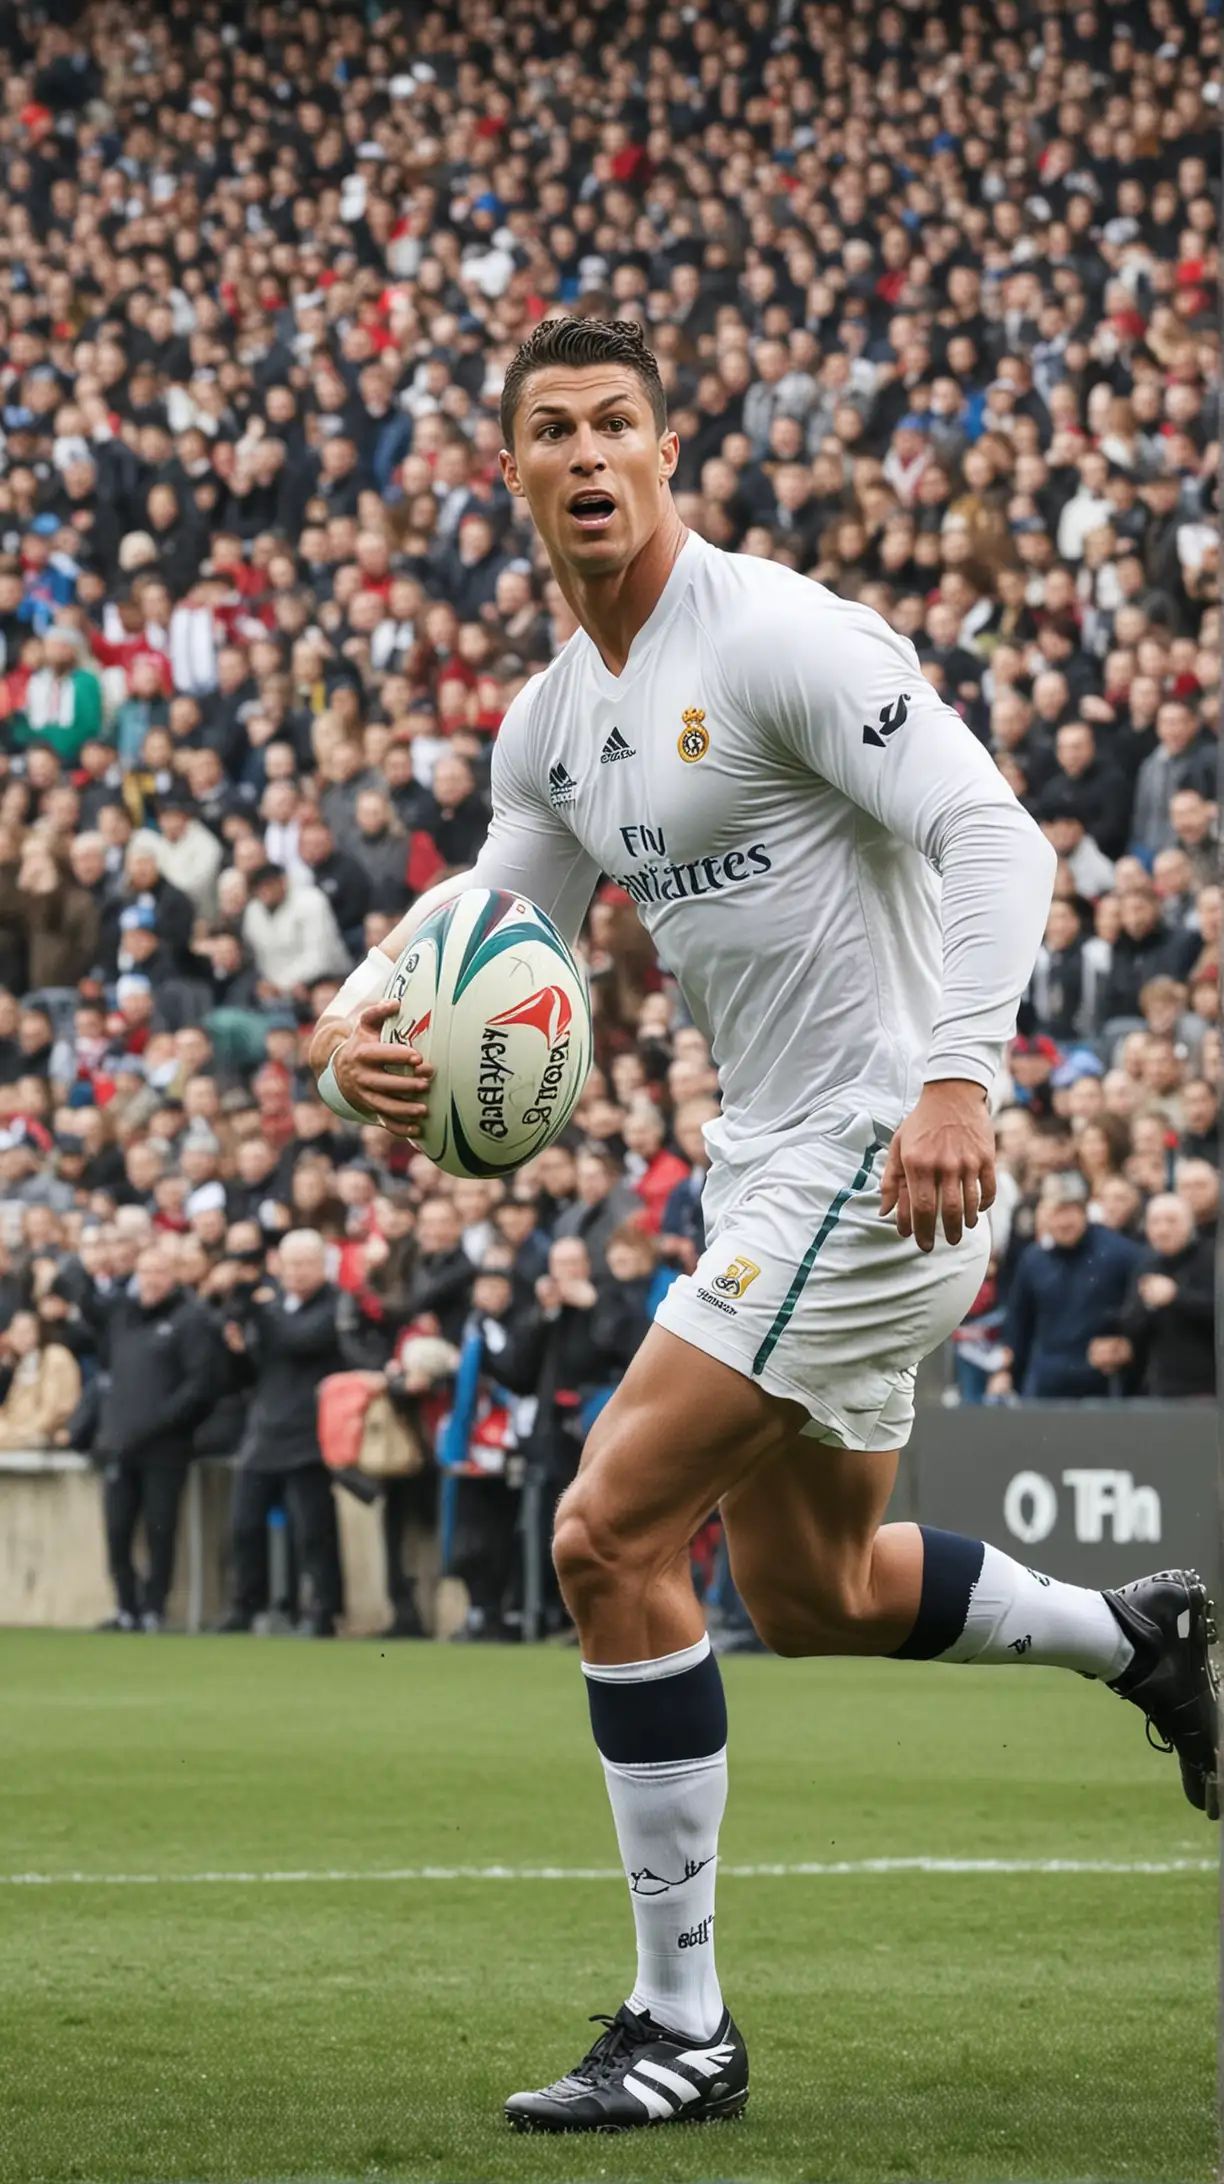 Cristiano Ronaldo Playing Rugby with Fans in Dynamic Stadium Scene